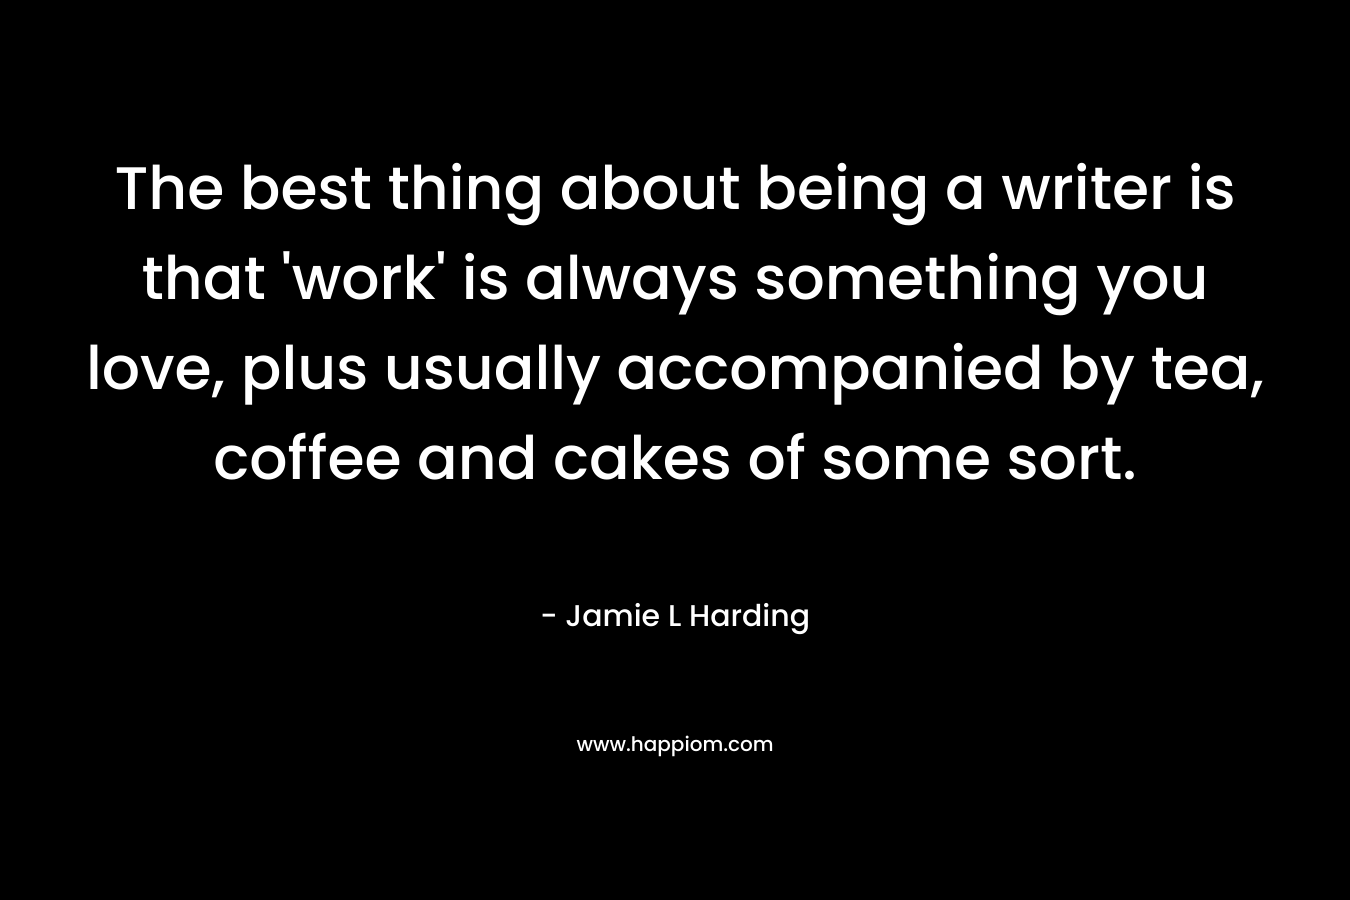 The best thing about being a writer is that ‘work’ is always something you love, plus usually accompanied by tea, coffee and cakes of some sort. – Jamie L Harding